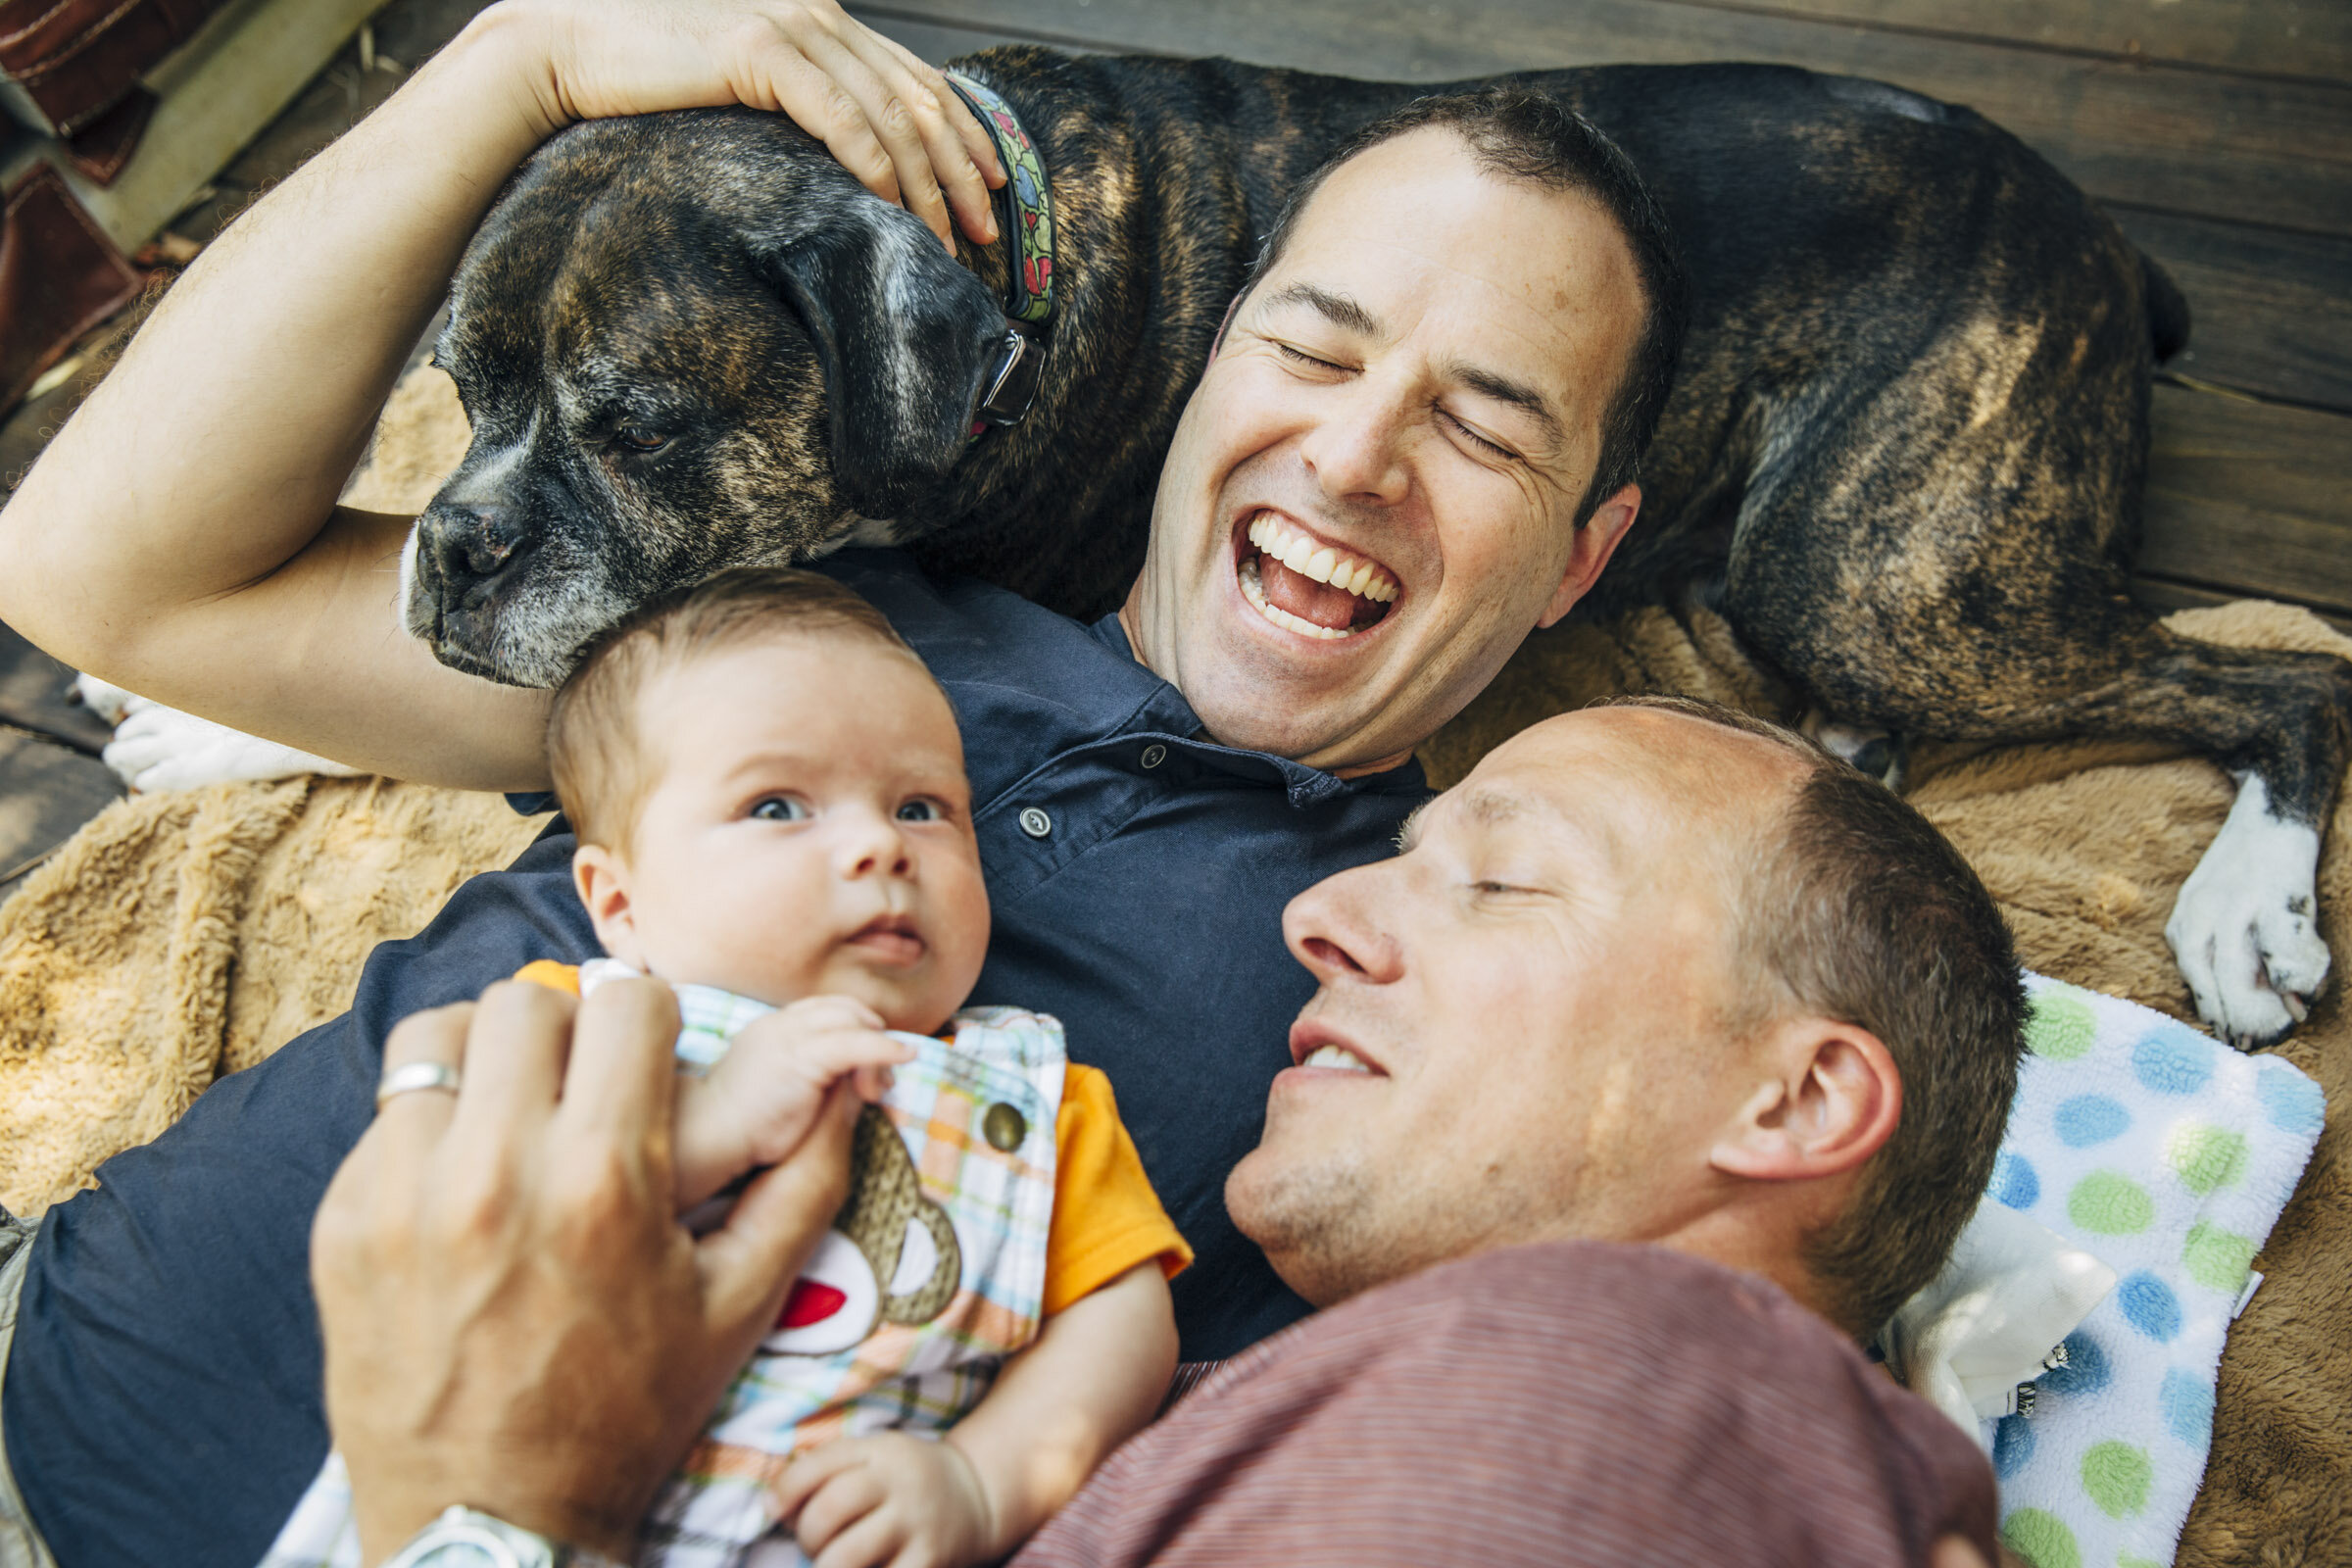 Gay-dads-snuggling-dog-baby--Inti-St-Clair-Lifestyle-is2014080300808.jpg